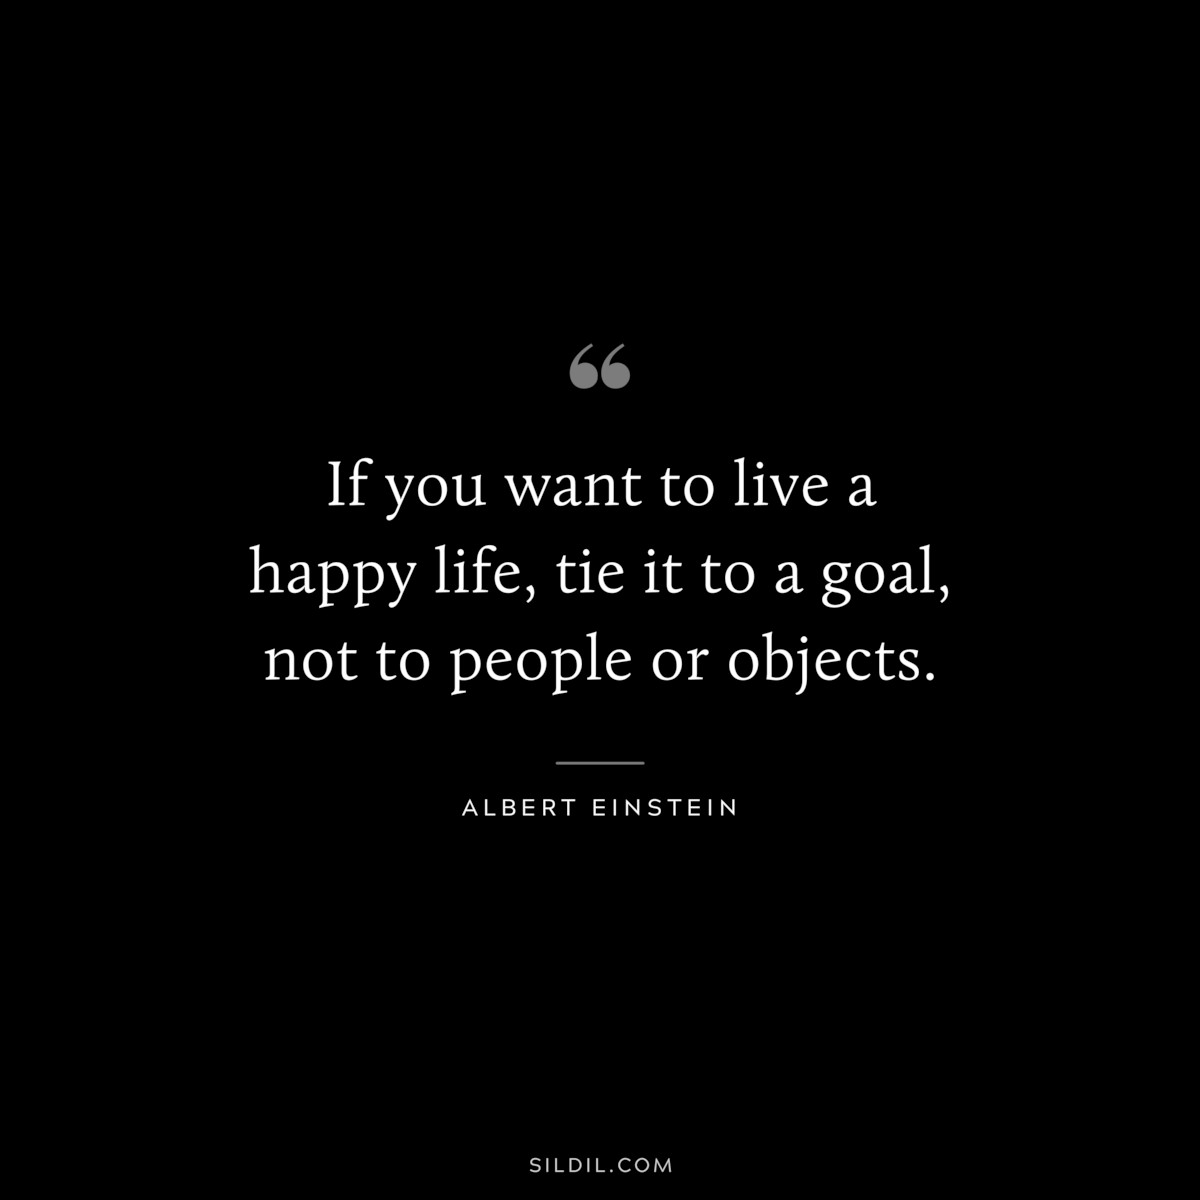 If you want to live a happy life, tie it to a goal, not to people or objects. ― Albert Einstein